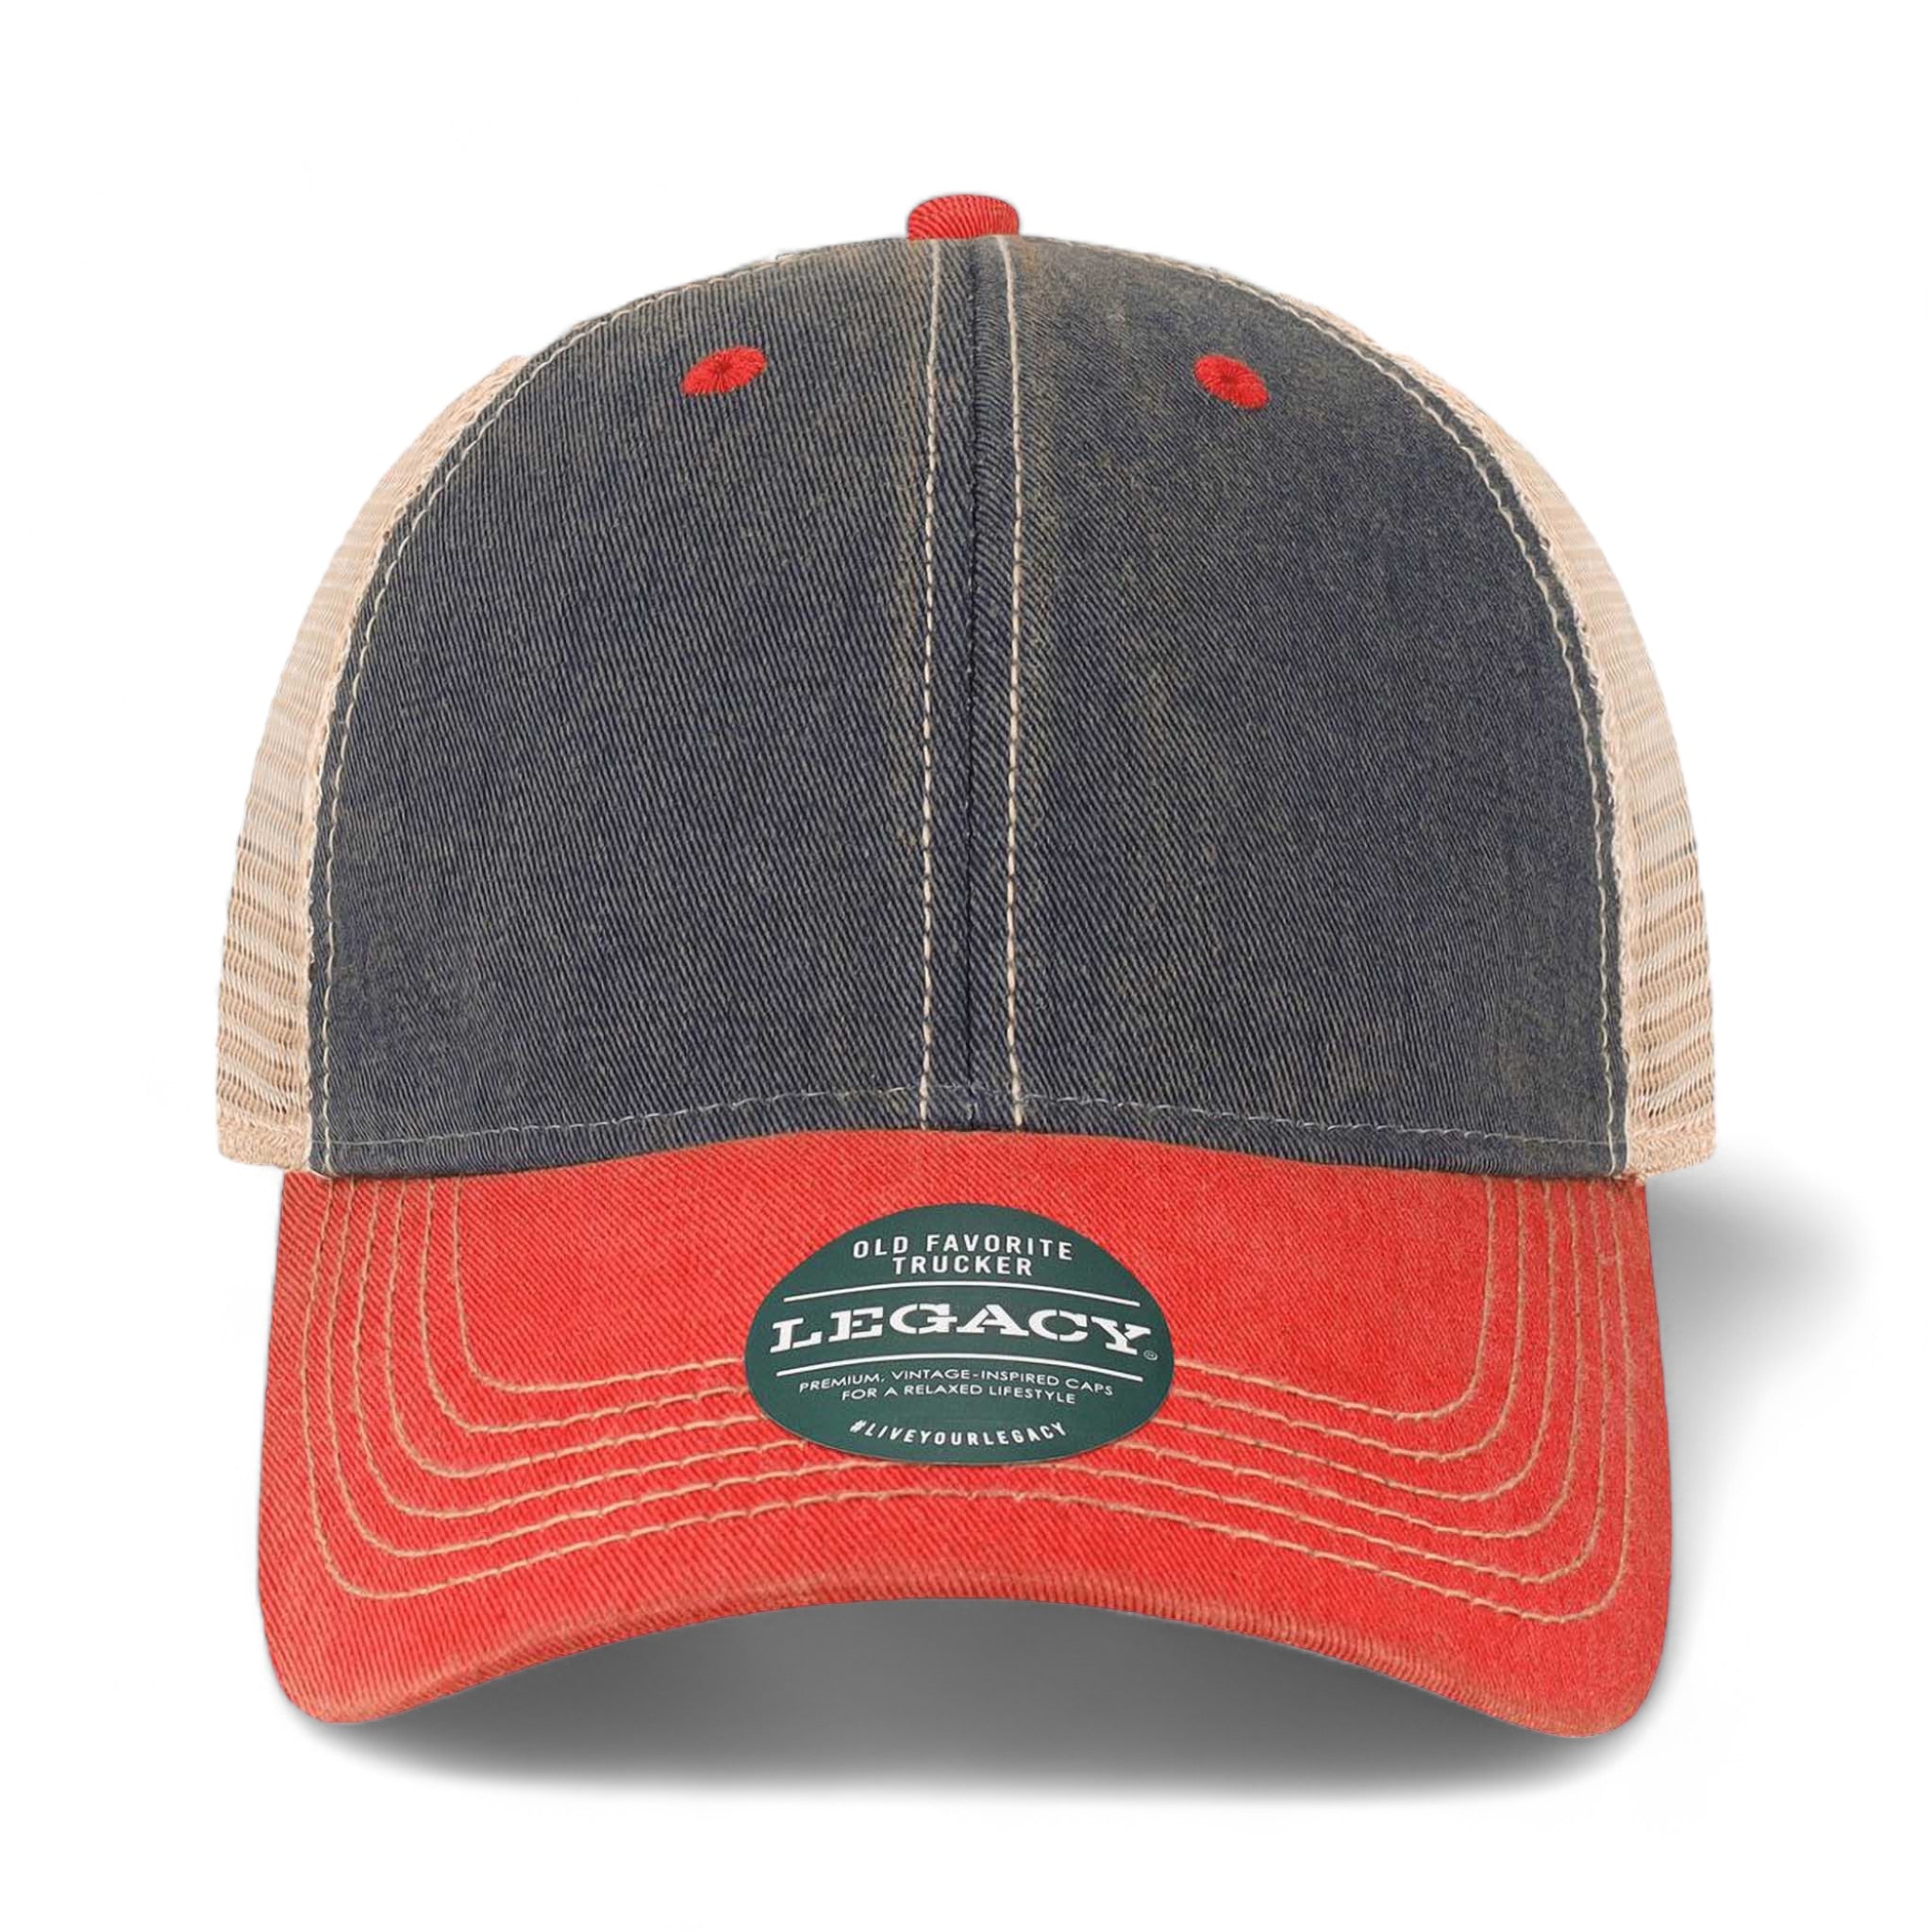 Front view of LEGACY OFAY custom hat in navy, scarlet red and khaki